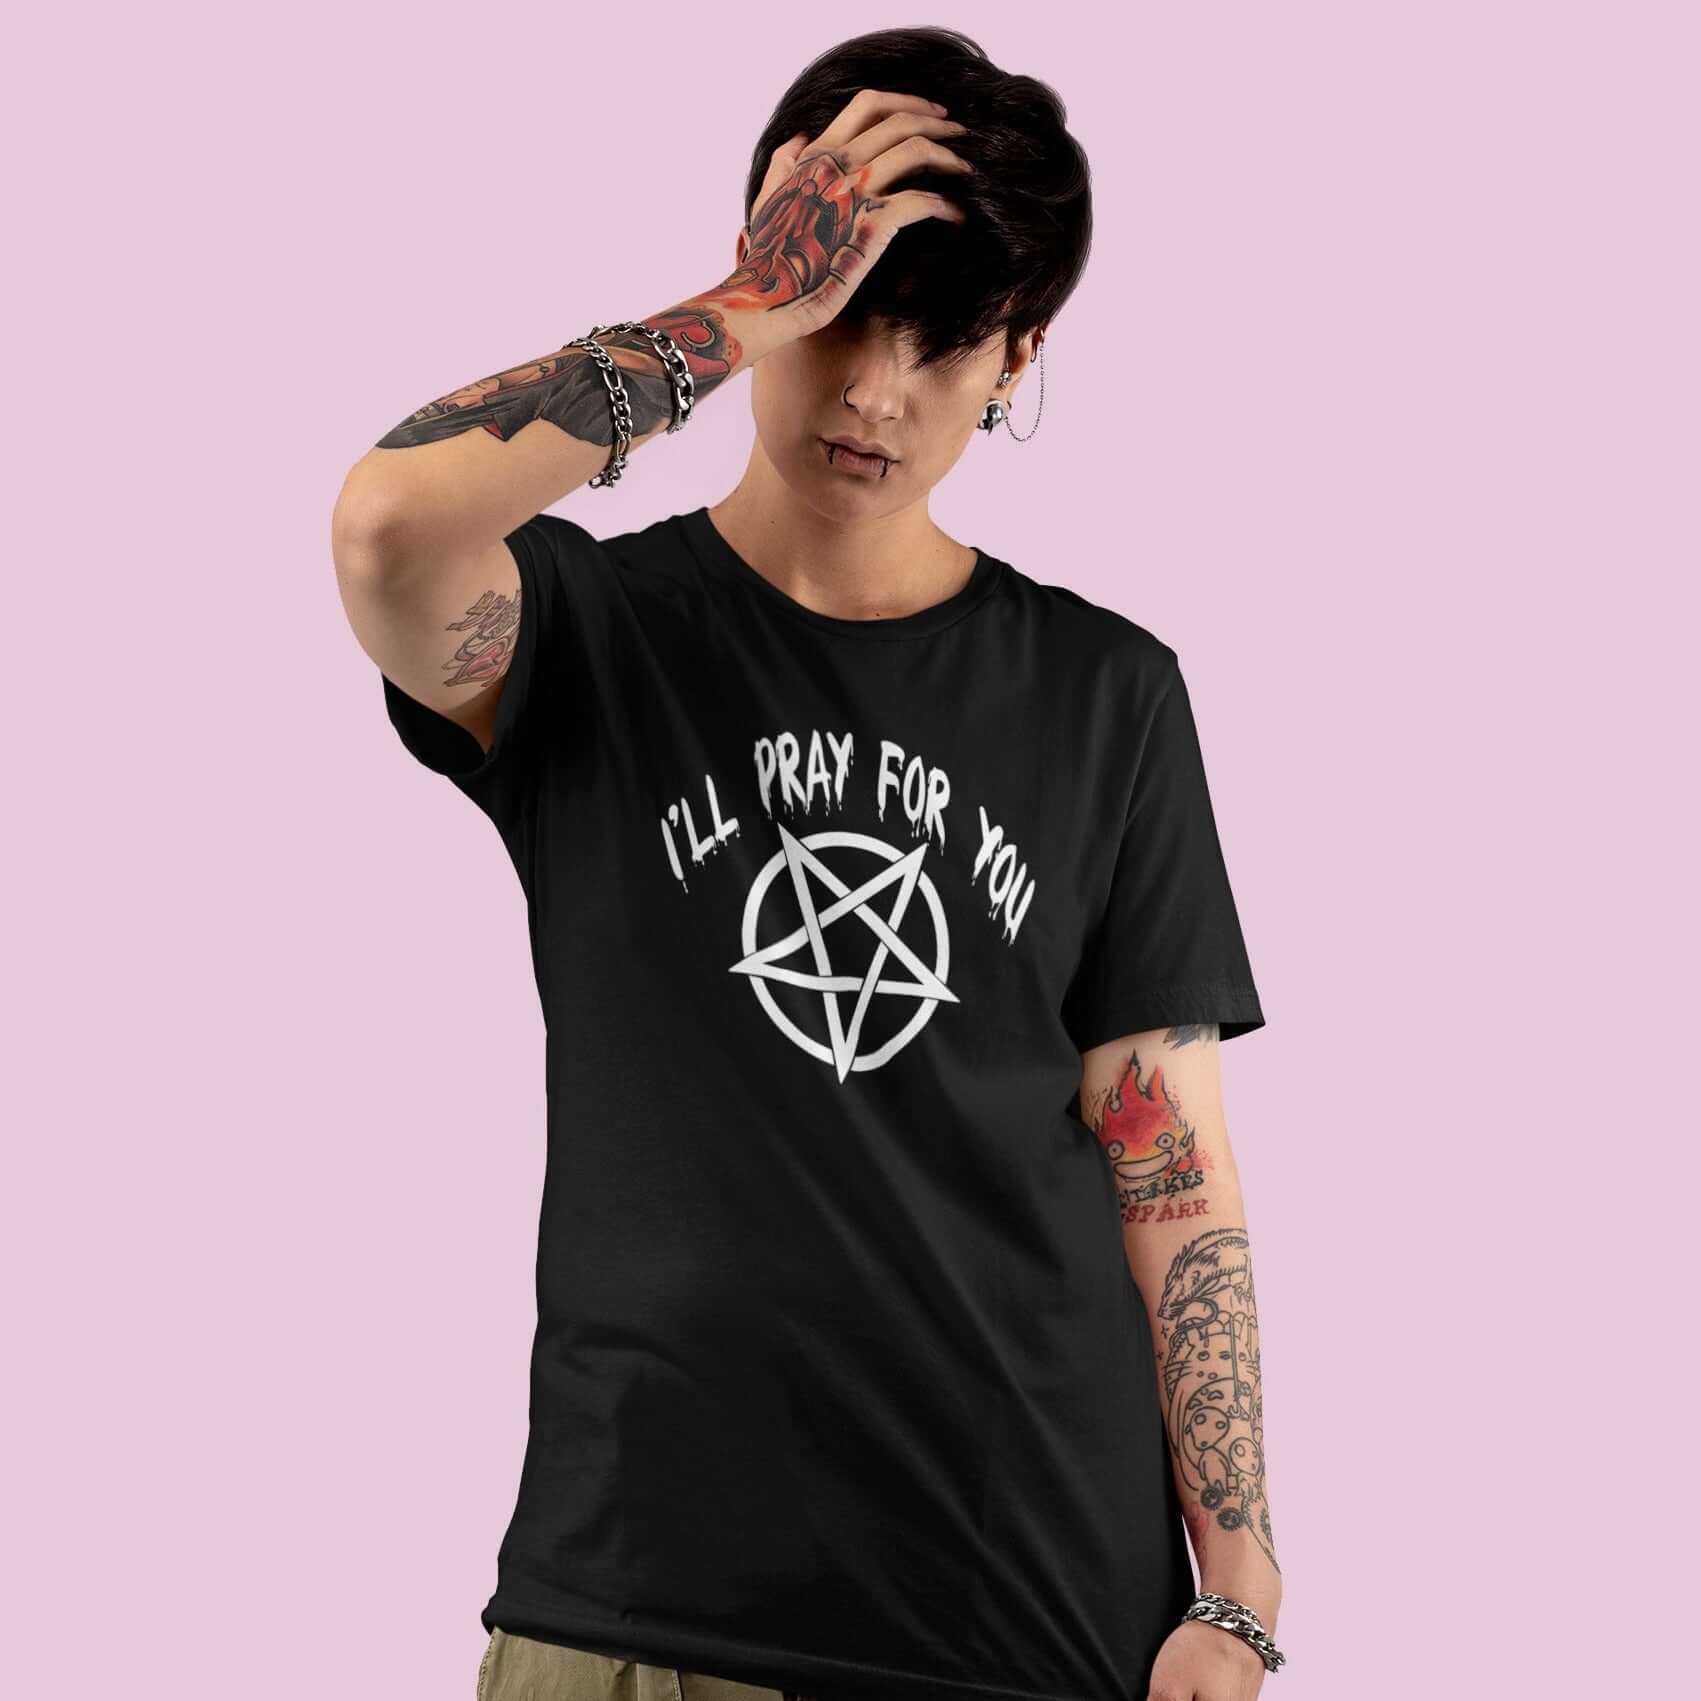 Edgy looking short haired woman wearing black t-shirt with image of a pentagram and the words I'll pray for you printed on the front.